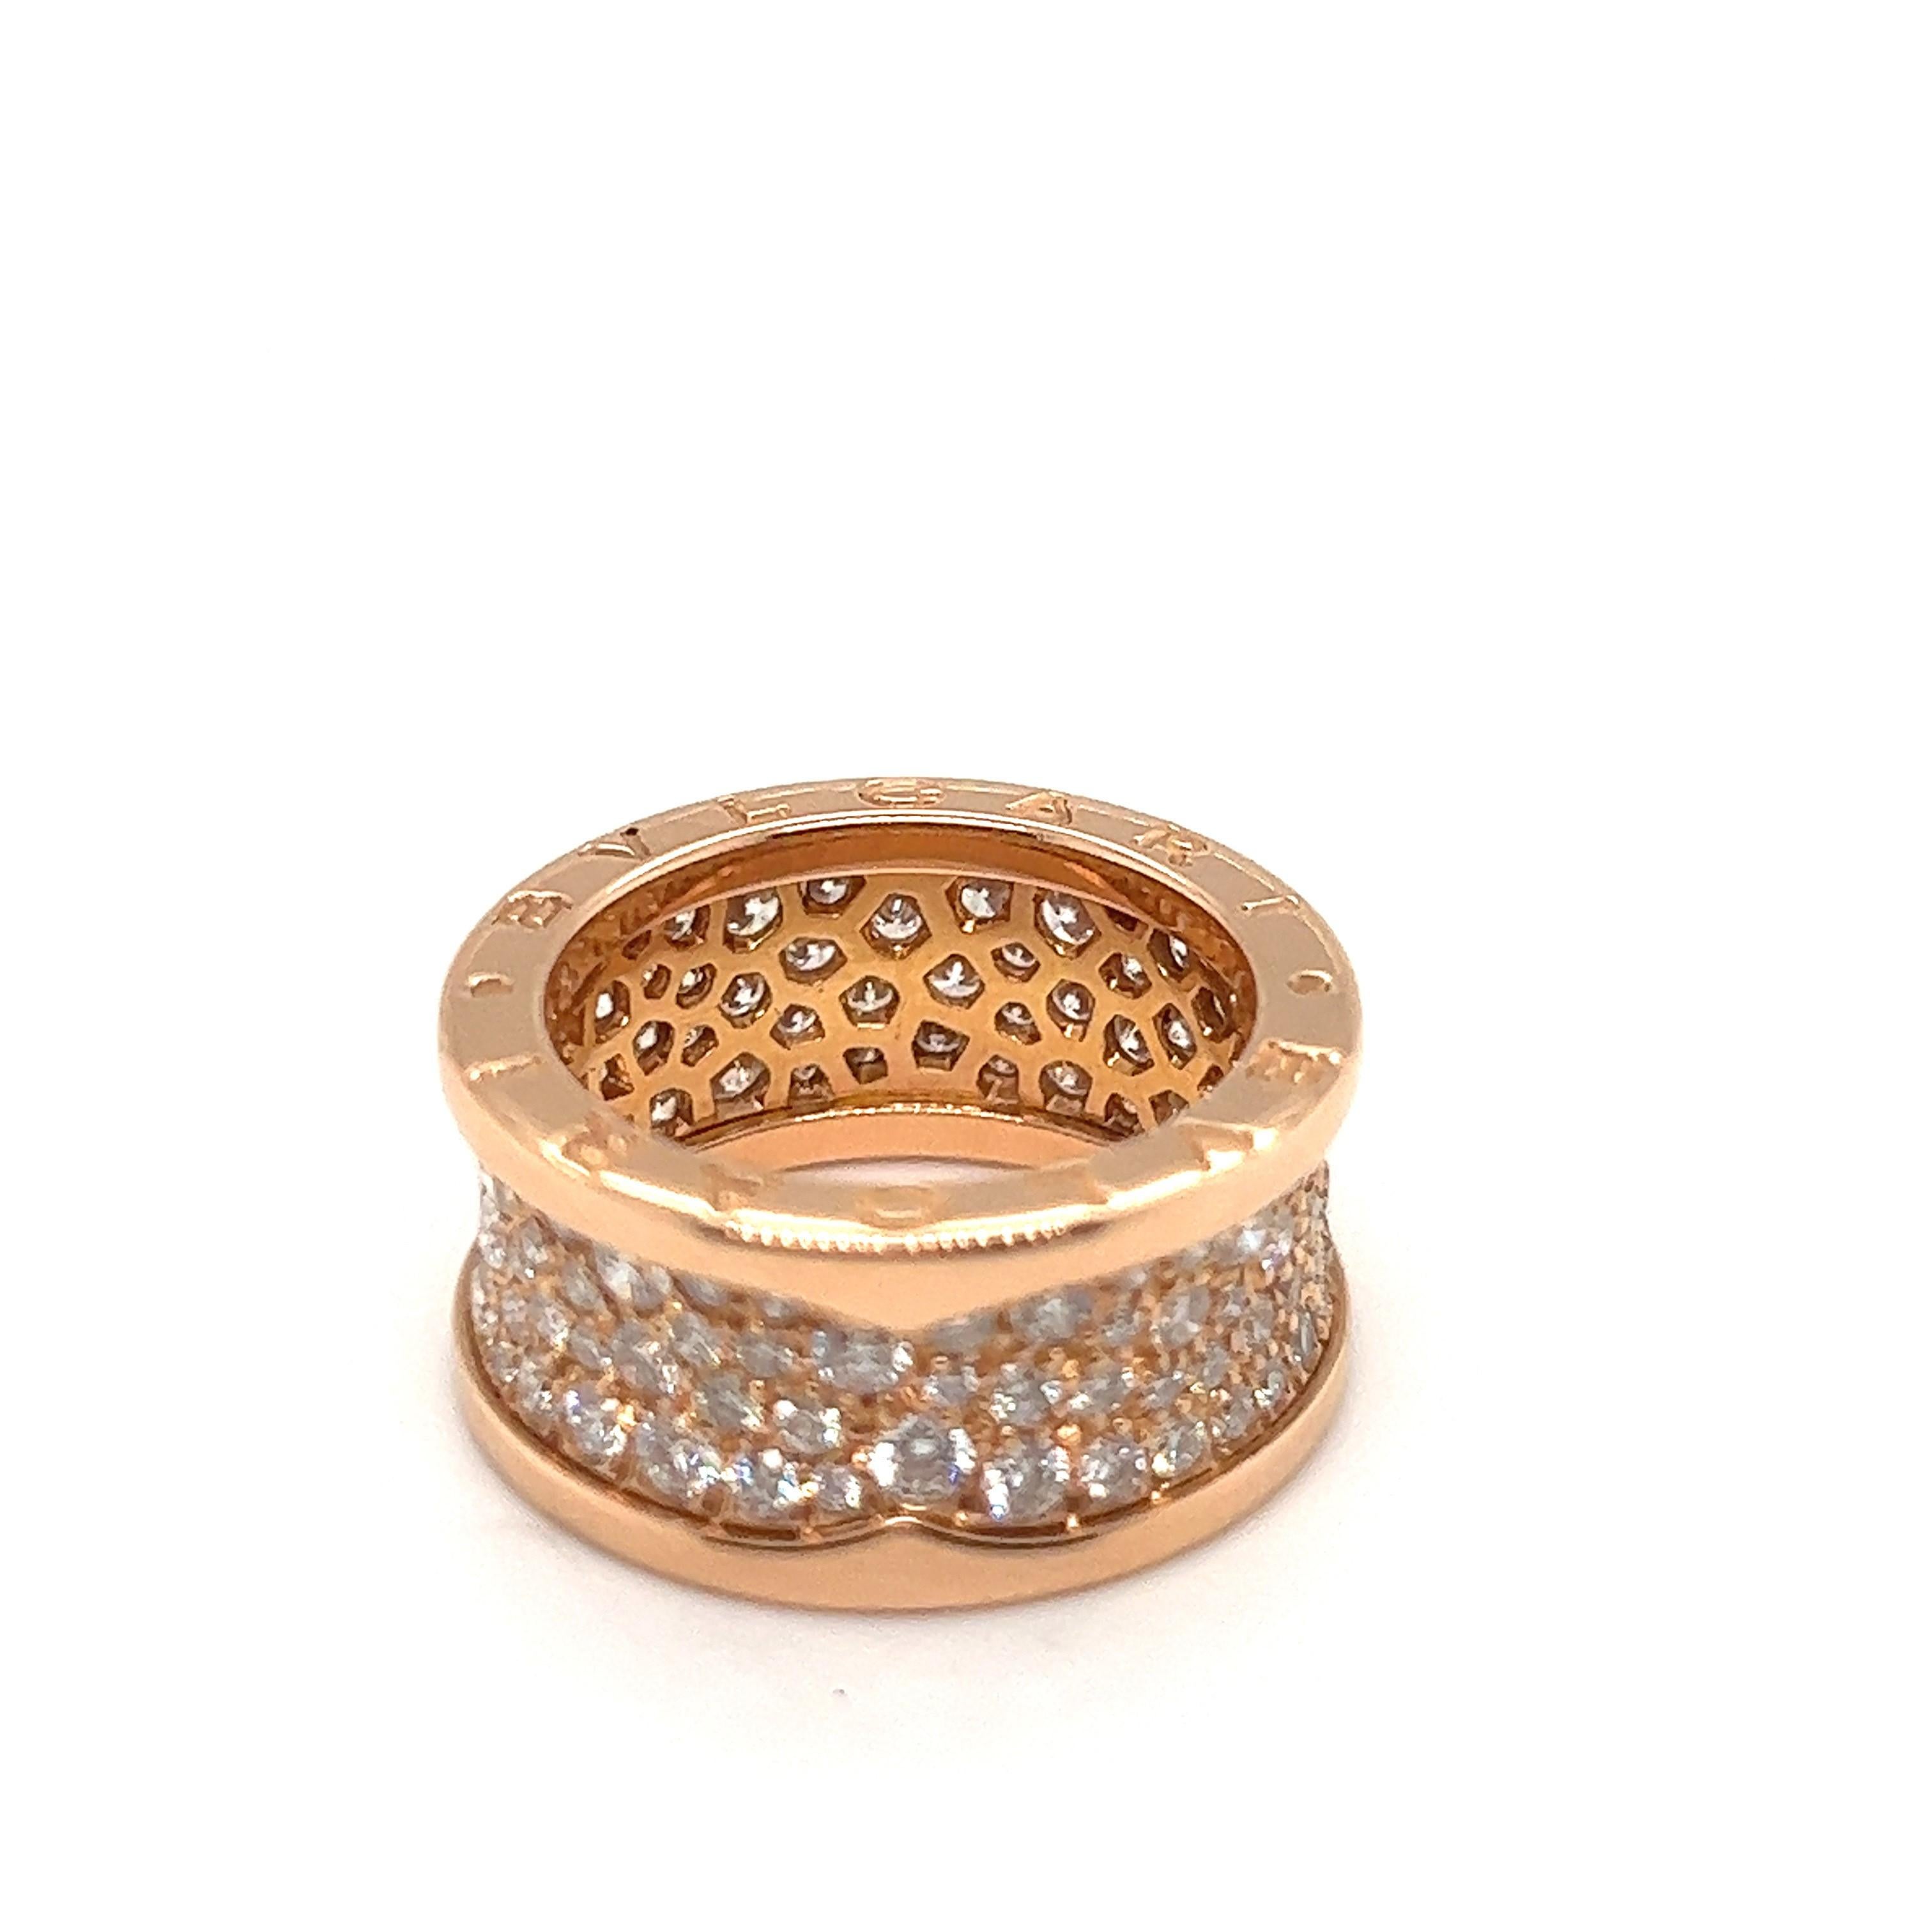 This Bulgari B.Zero1 ring features 2.12 carats of diamonds pave diamonds set in 18K rose gold. Made in Italy. Signed BVLGARI. 
Size 51 - 5.75
Retail Price - 20,900$